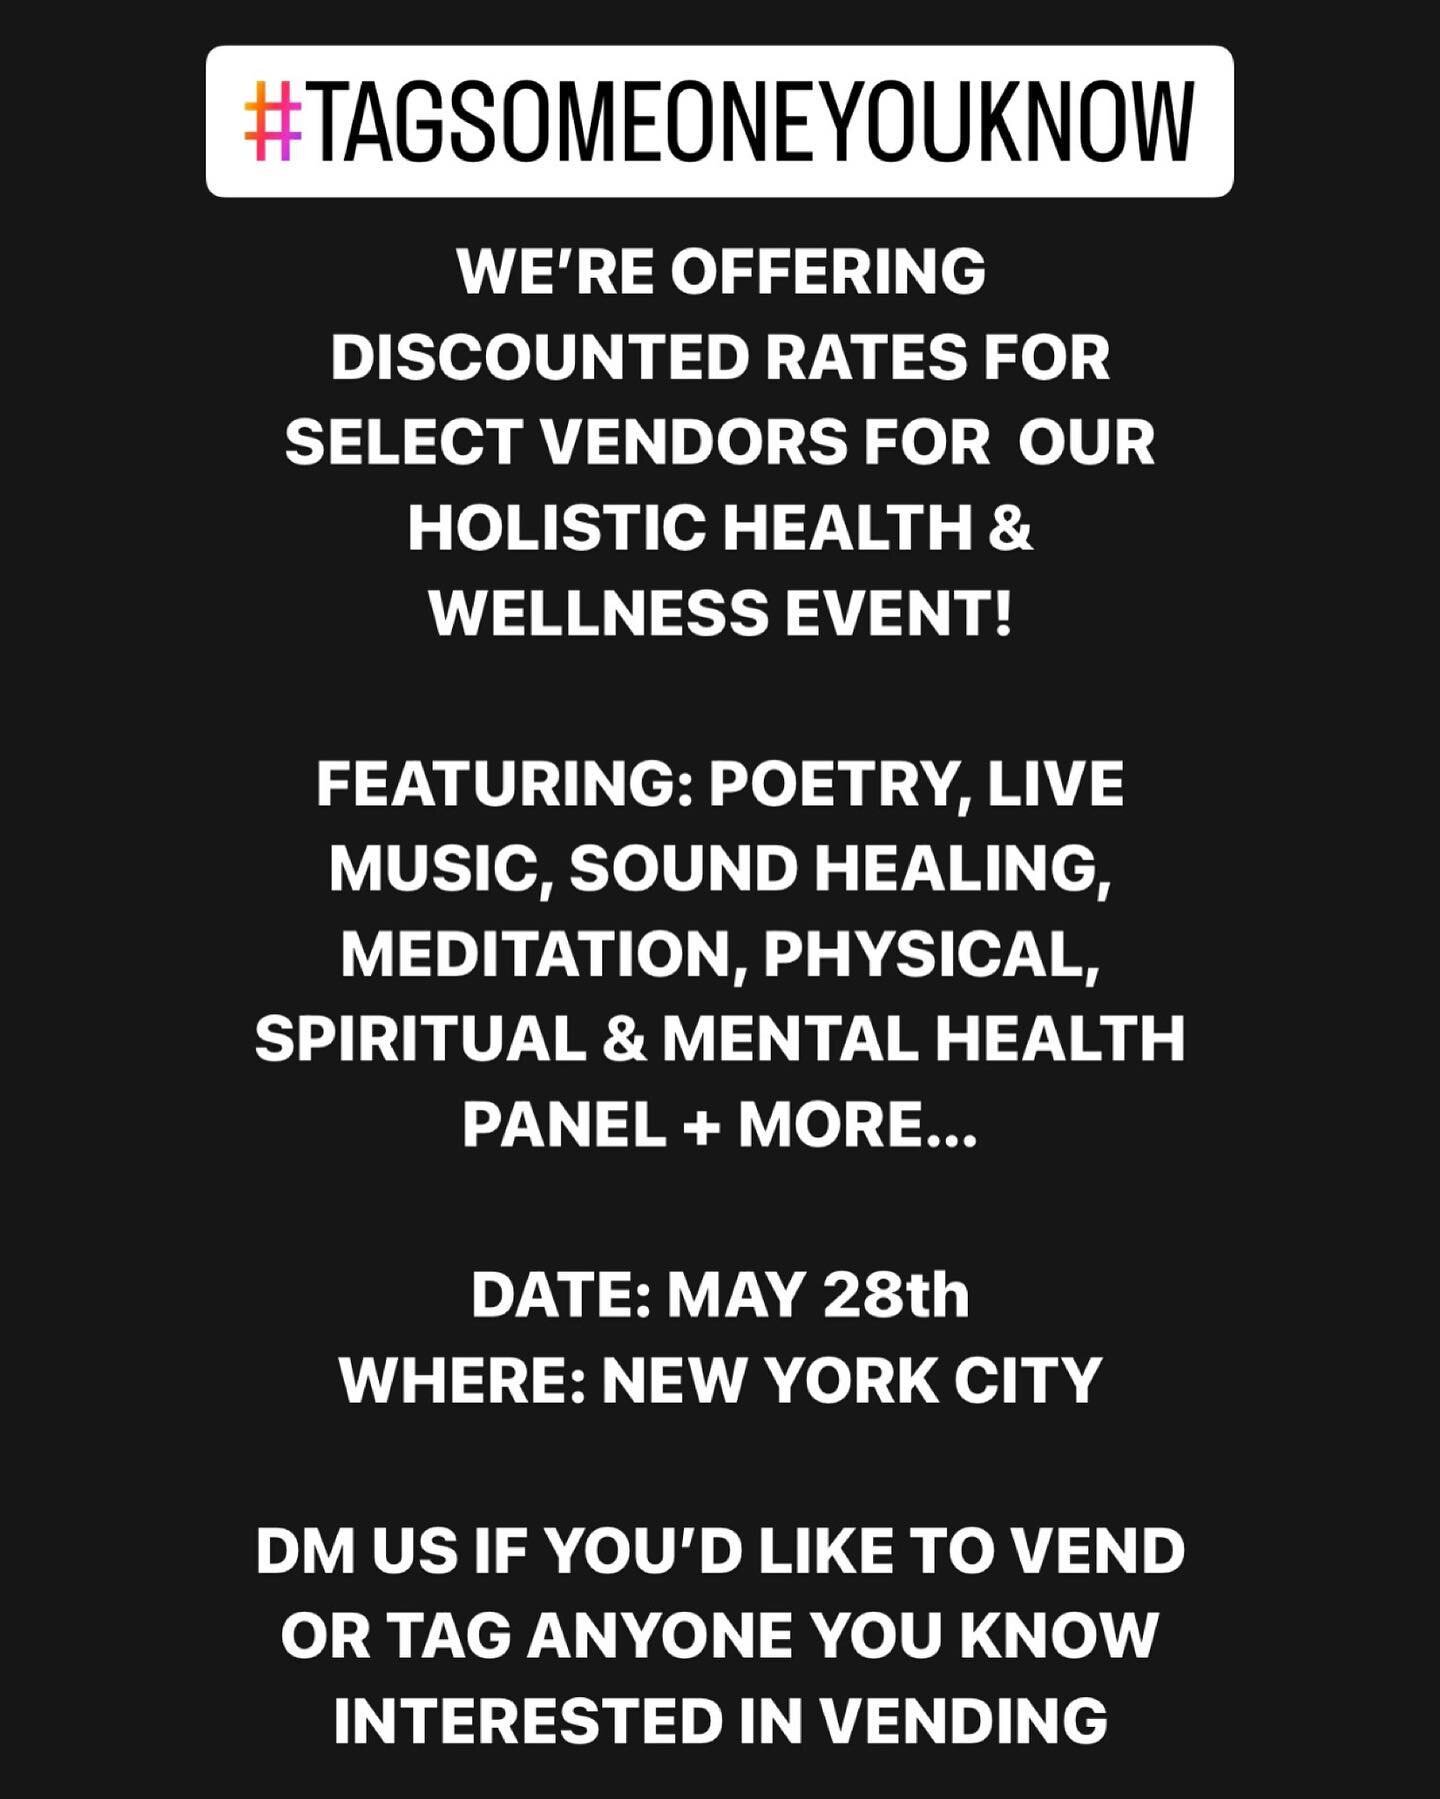 Sunday May 28th we have our holistic and wellness event and are looking for vendors in the health and wellness realm! 

Tag someone that you know or if you&rsquo;re that someone you know DM us.

#vendors #vendorswanted #nycvendors #holistichealth #ho